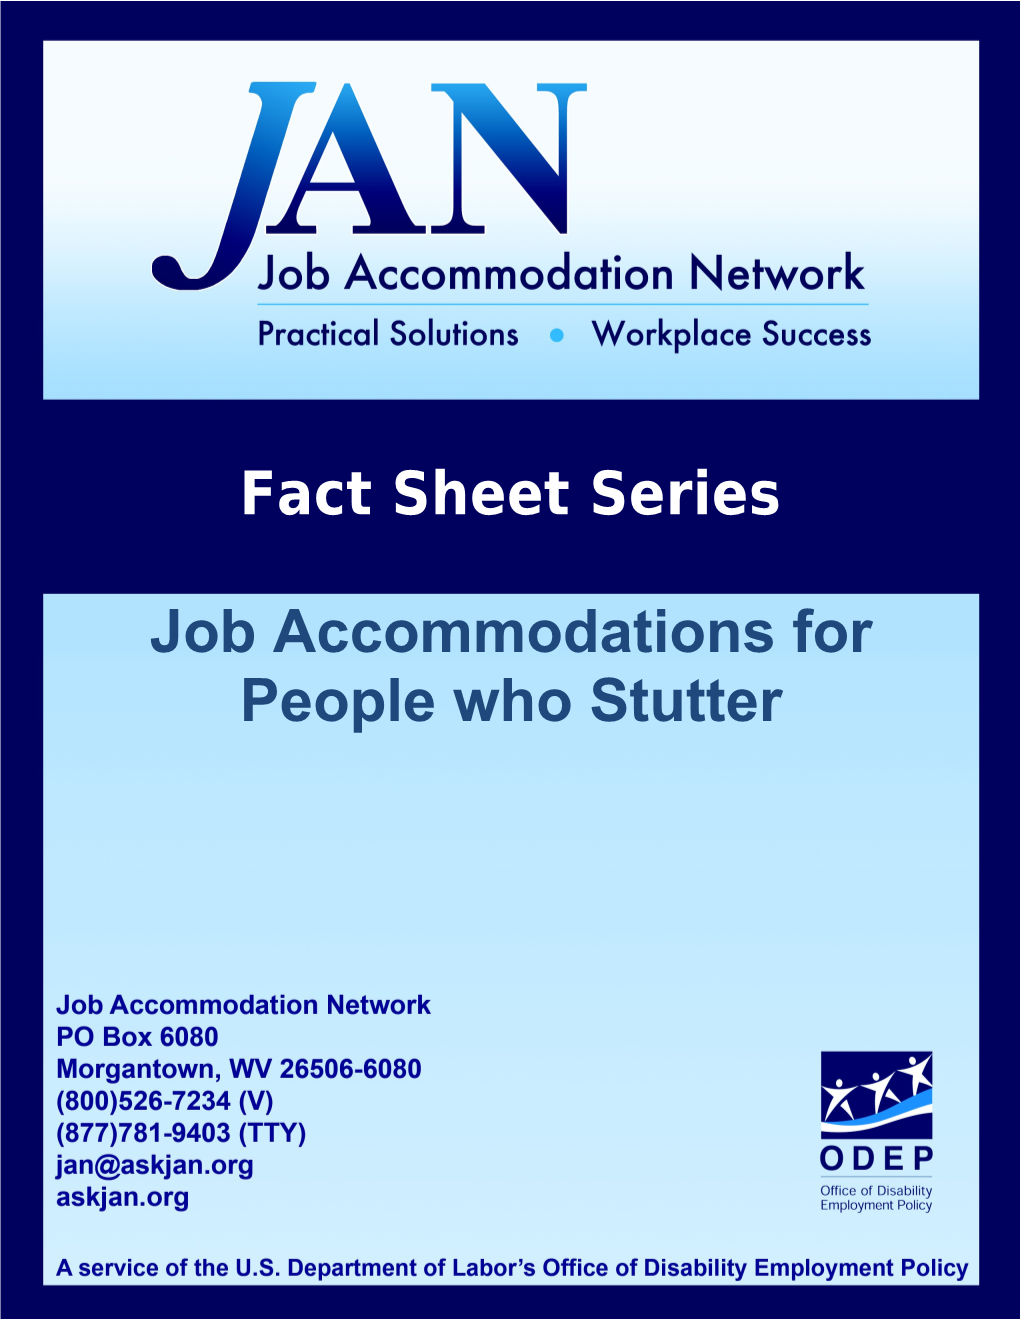 Job Accommodations for People Who Stutter